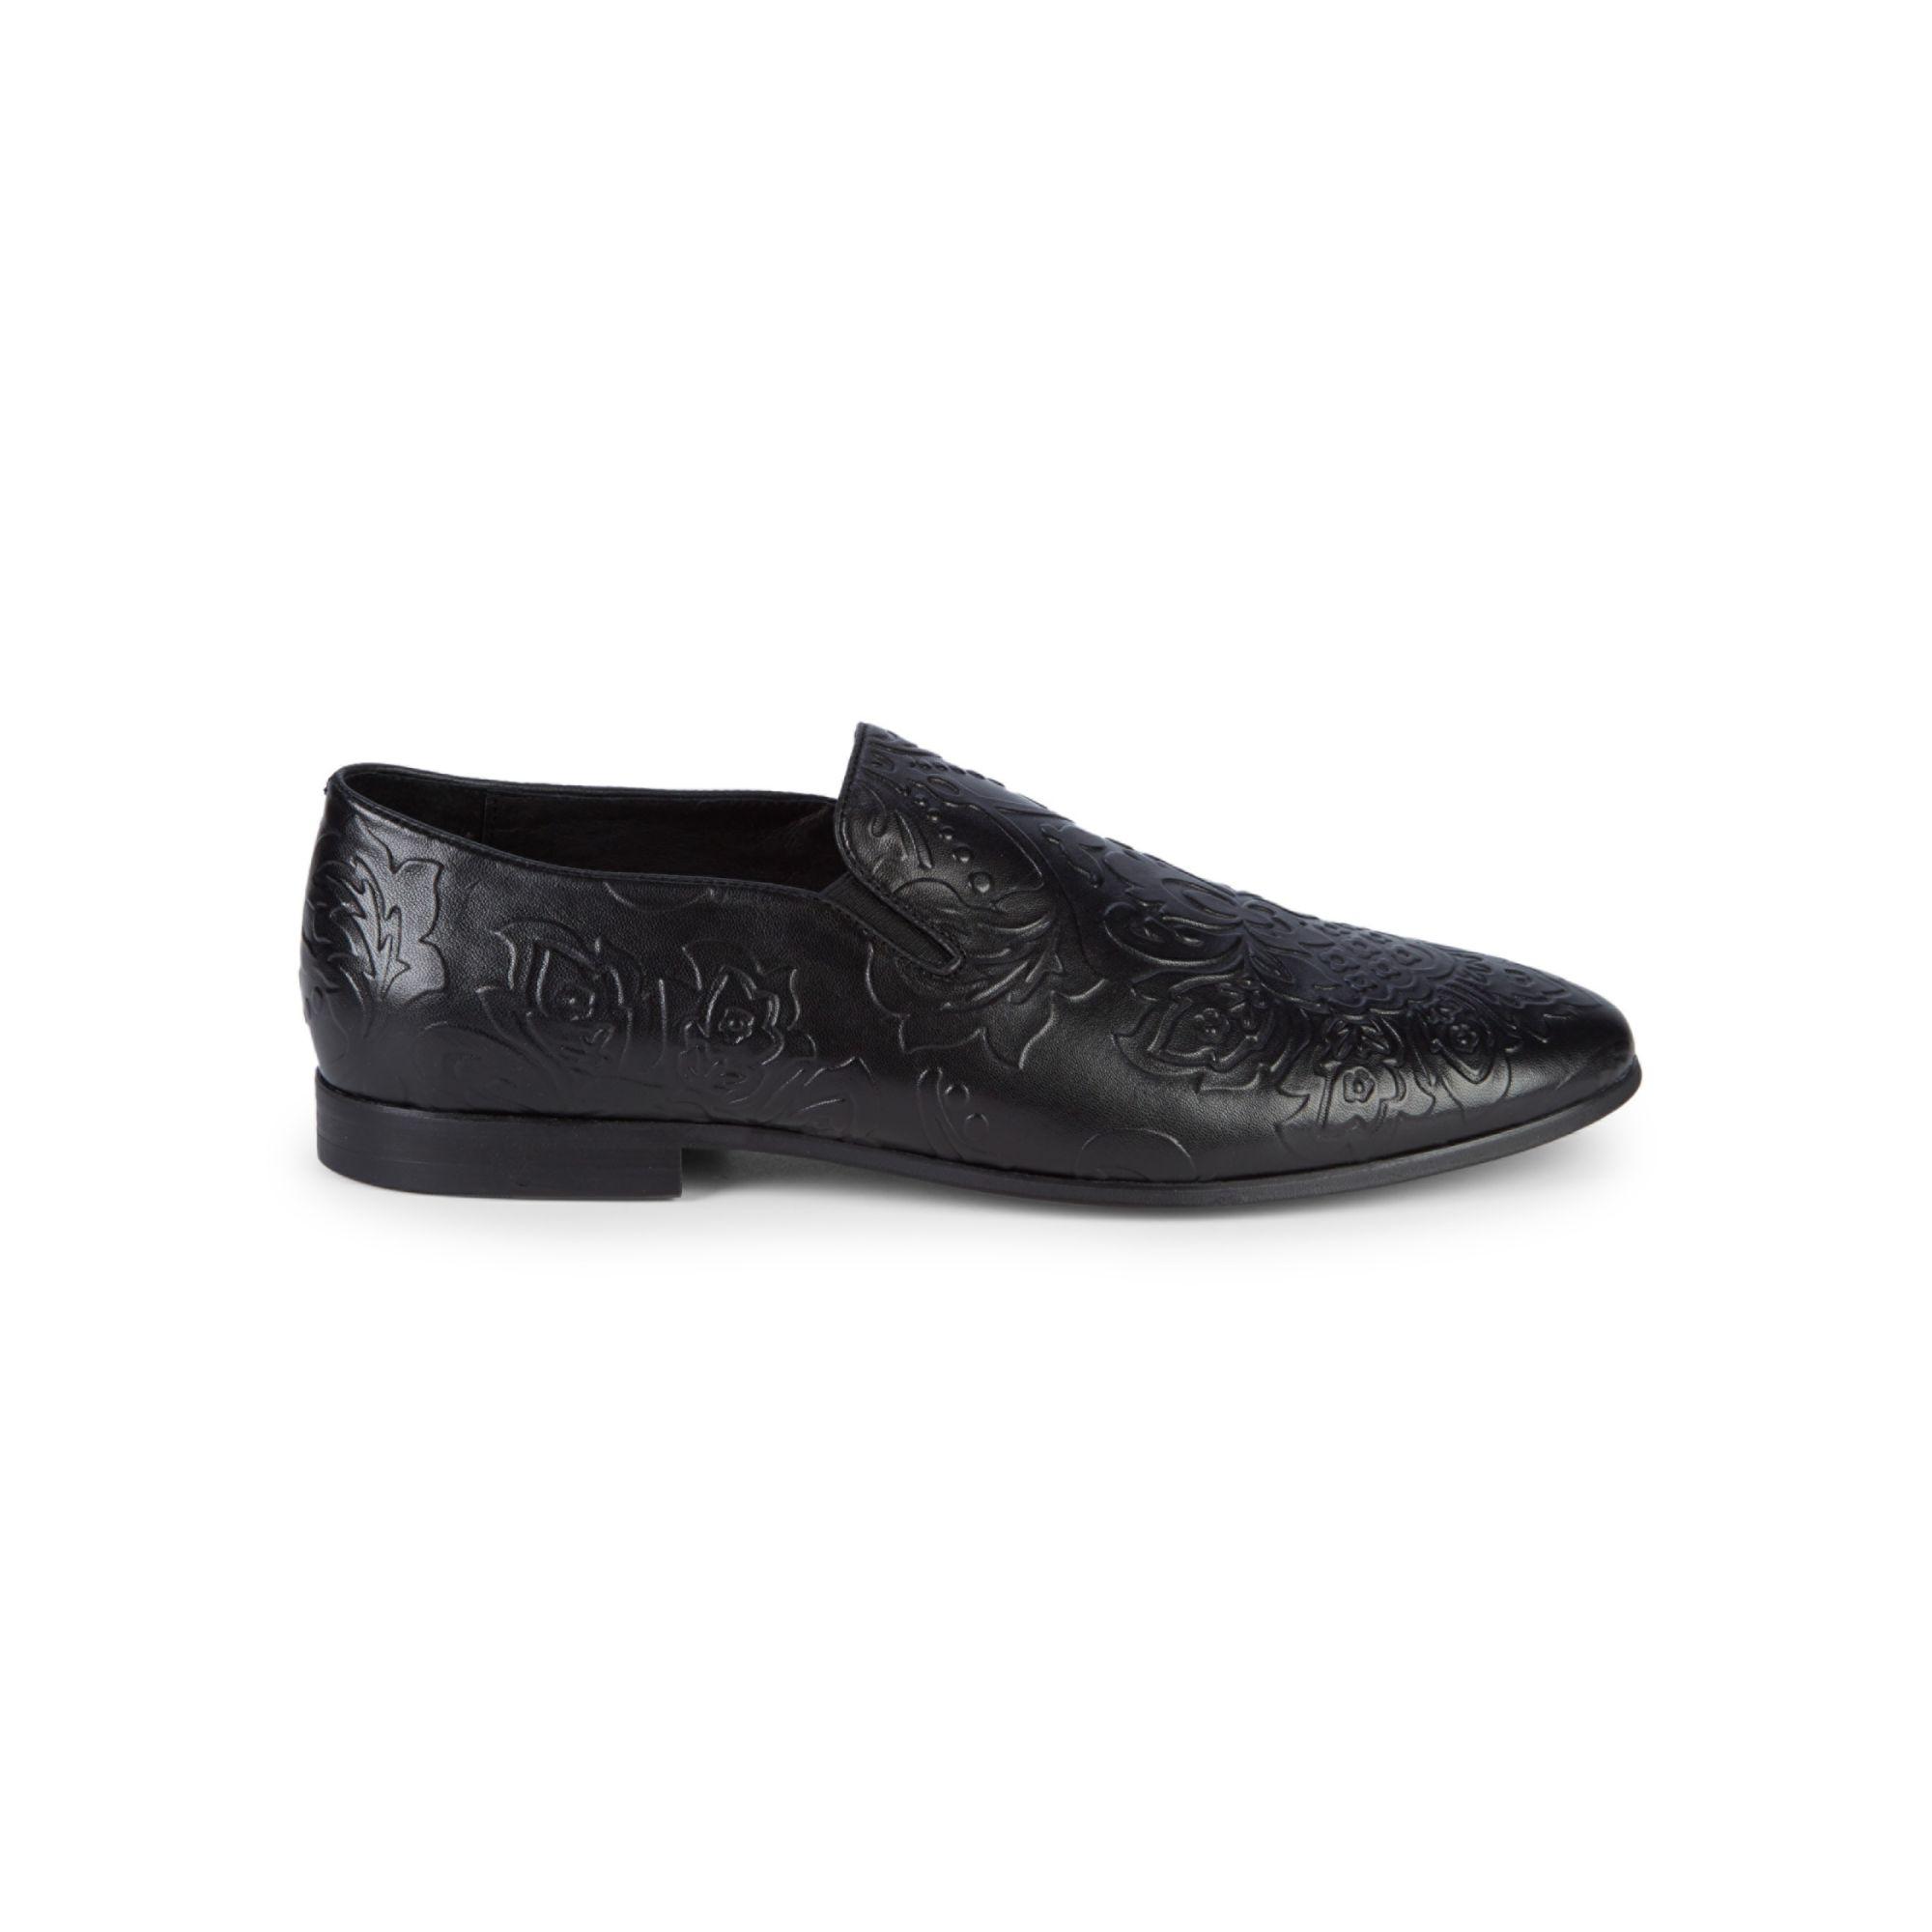 Robert Graham Textured Leather Loafers in Black for Men - Lyst